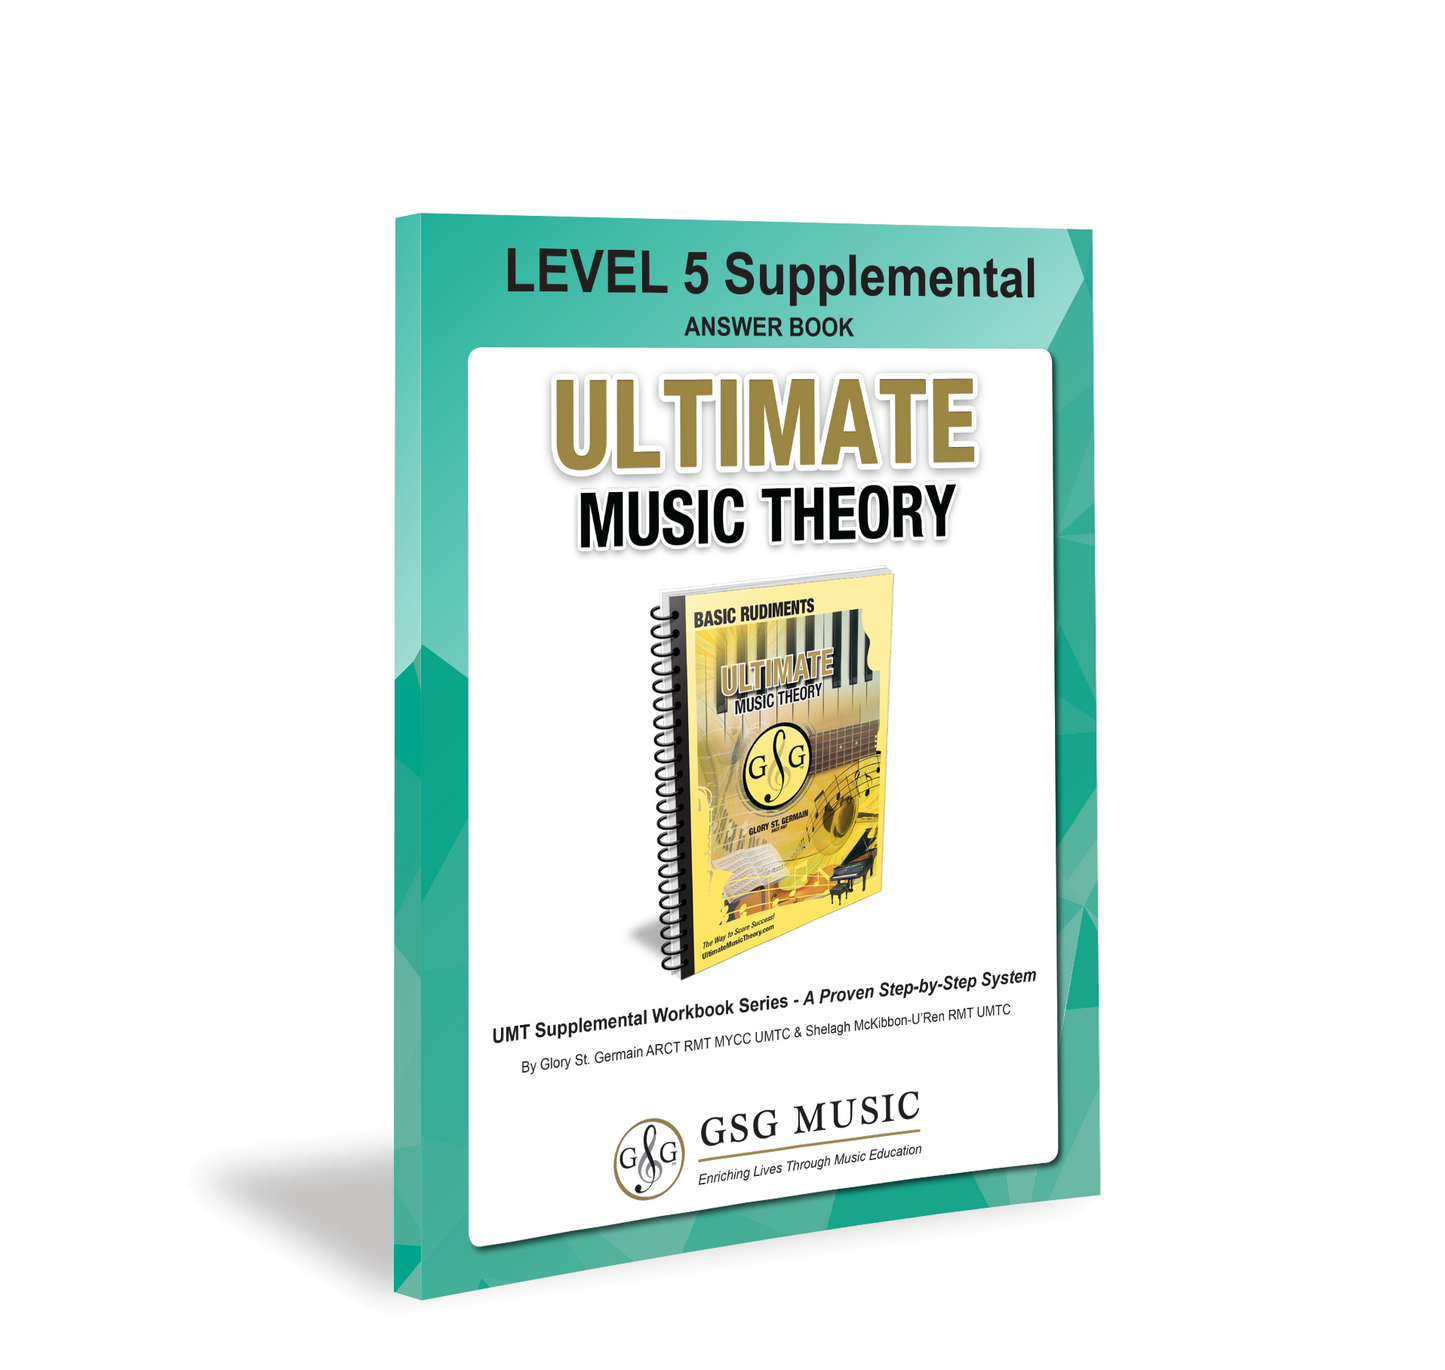 Ultimate Music Theory Level 5 Supplemental Answer Book